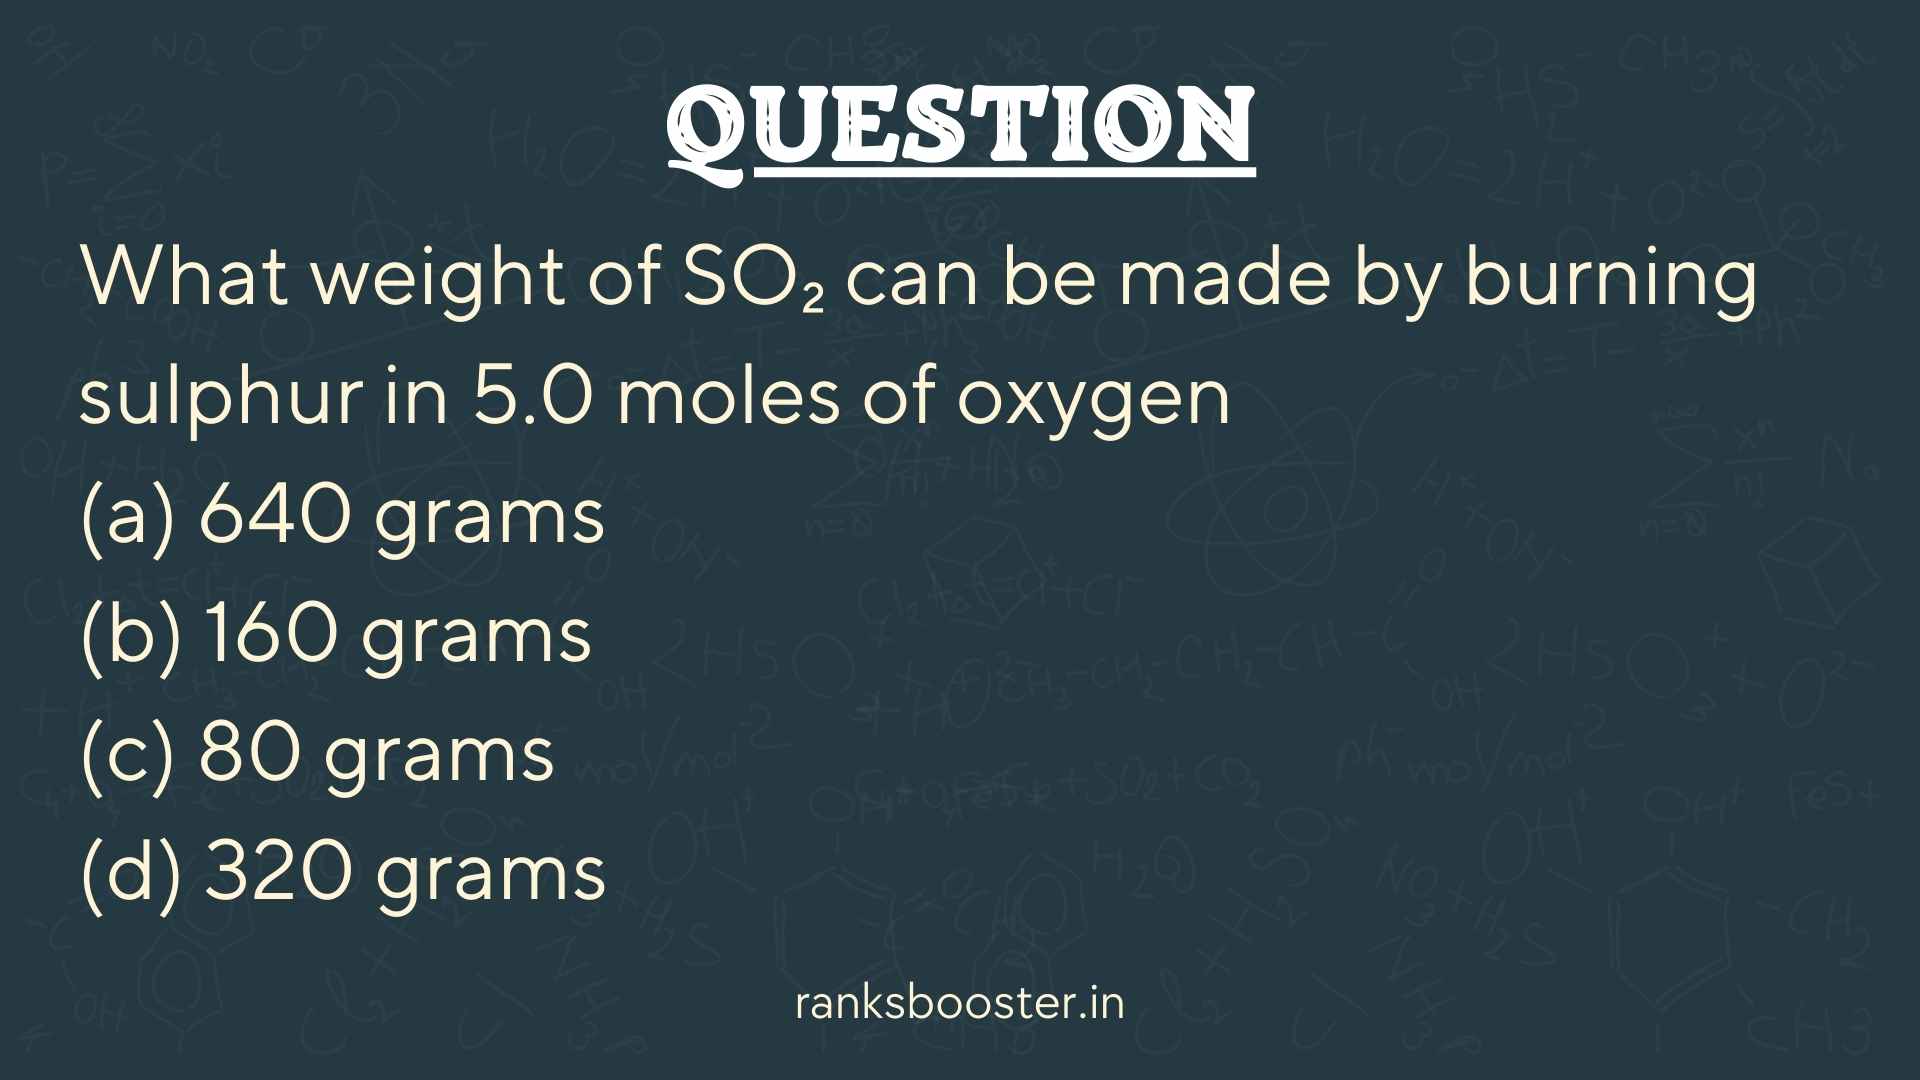 Question: What weight of SO₂ can be made by burning sulphur in 5.0 moles of oxygen (a) 640 grams (b) 160 grams (c) 80 grams (d) 320 grams